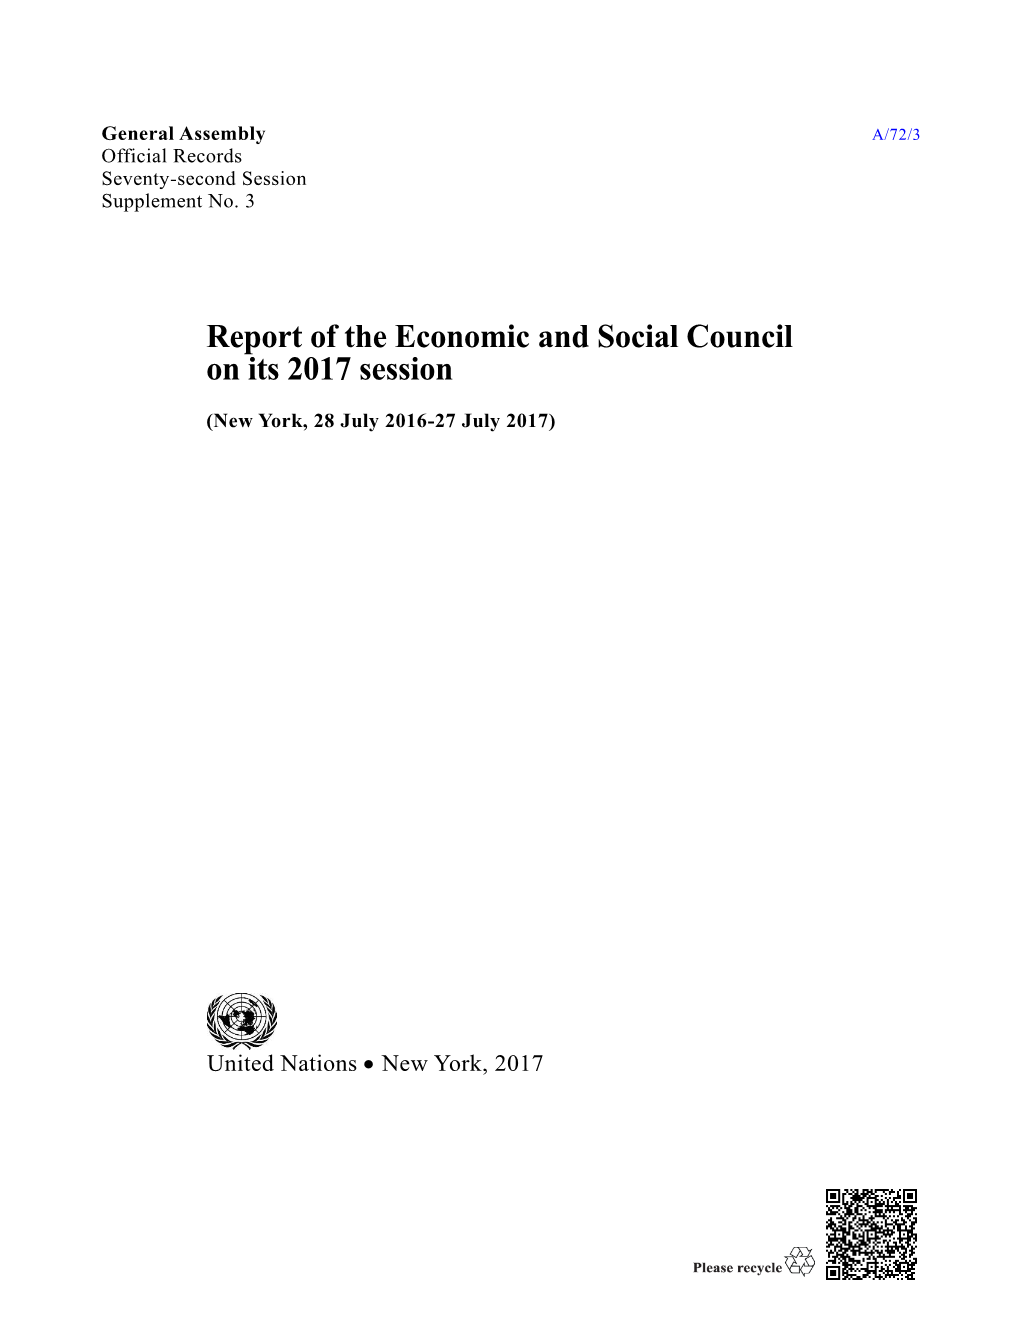 Report of the Economic and Social Council on Its 2017 Session